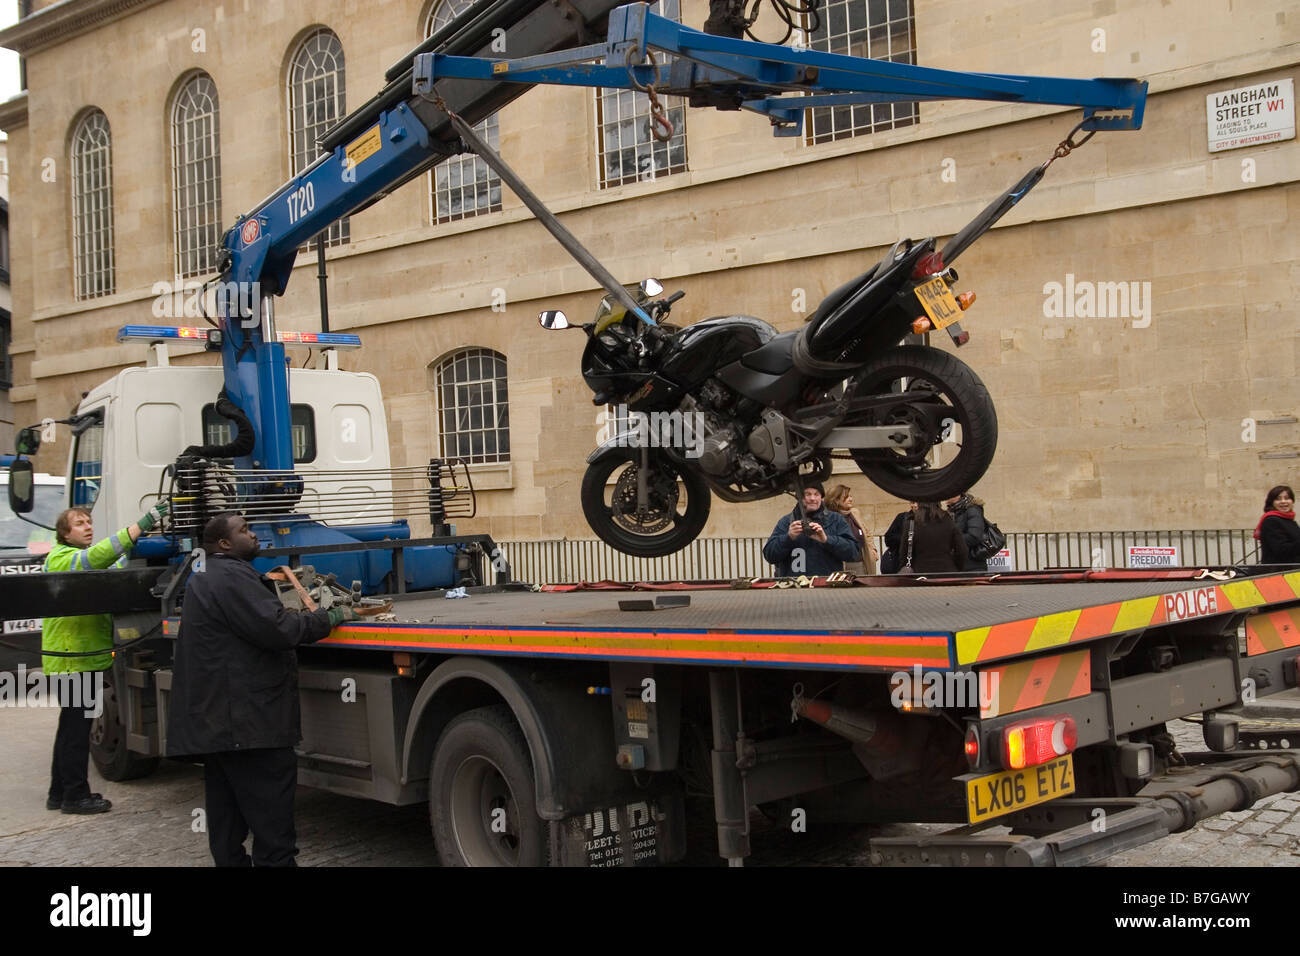 police remove an illegally parked motorcycle in London Stock Photo